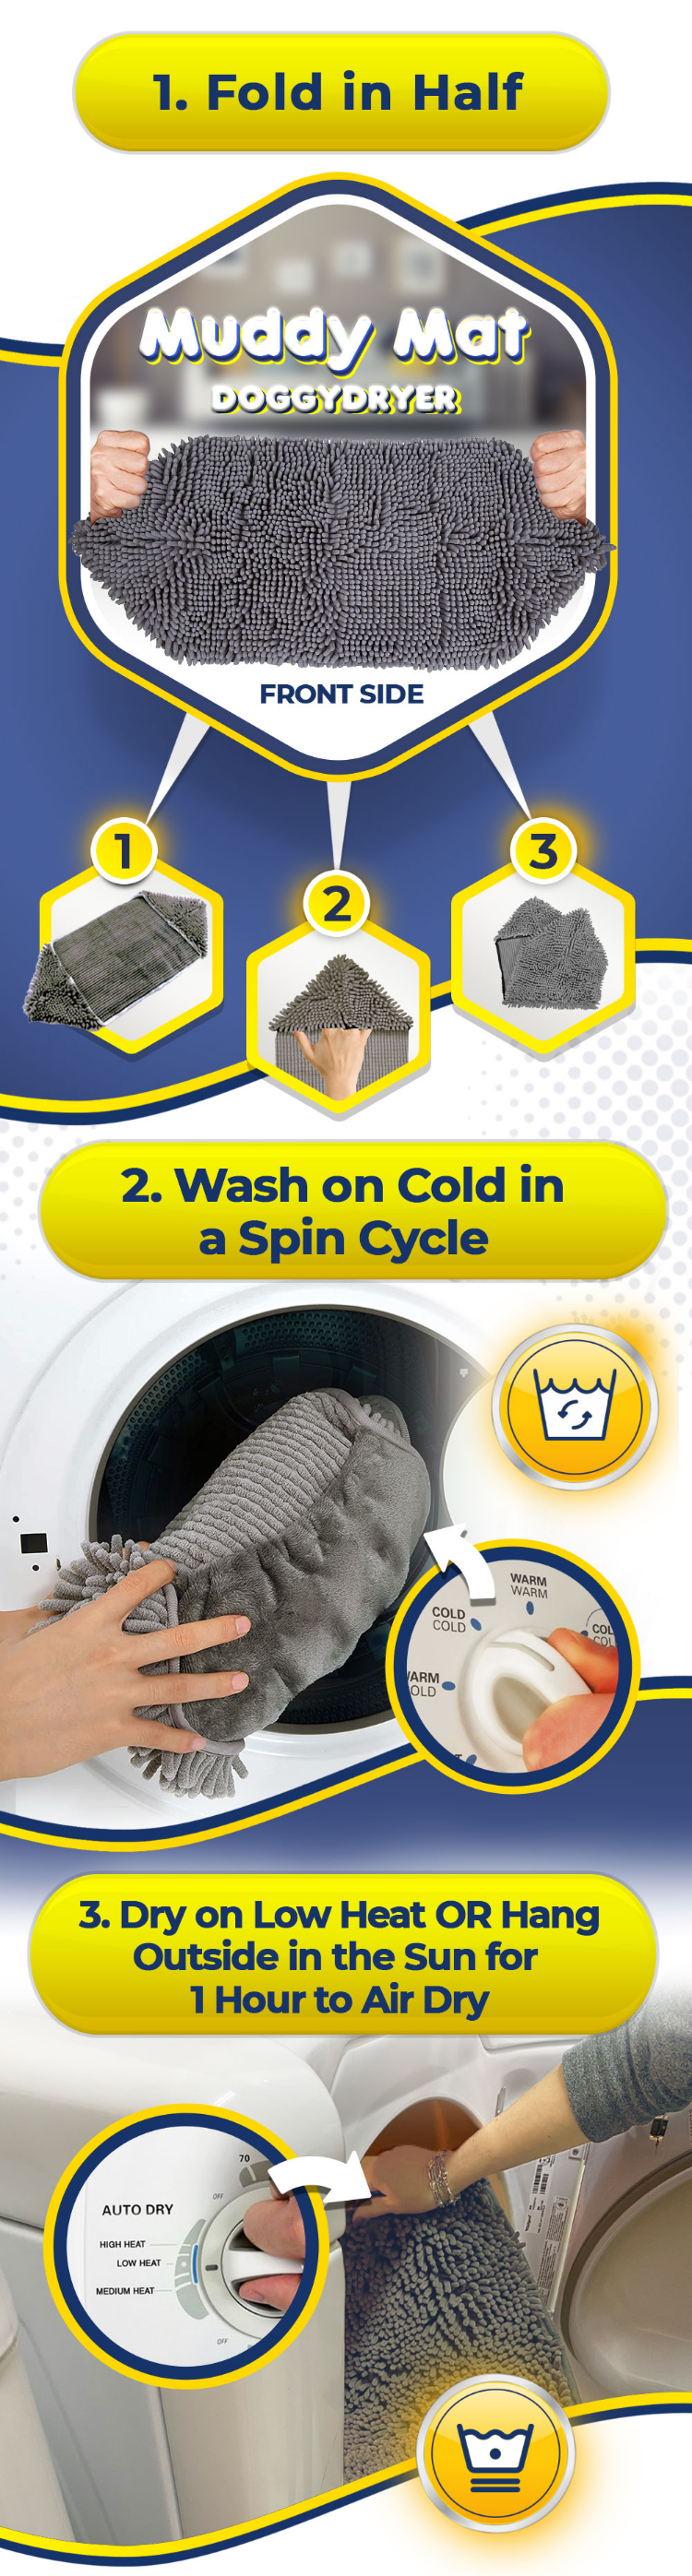  Muddy Mat® Doggy Dryer, Highly Absorbent Microfiber Washable Dog  Shammy, Quick Drying Towel Absorber, Extra Soft Plush Wrap Chenille Bath  Towels to Dry Soggy Large Pets & Small Puppy - Grey